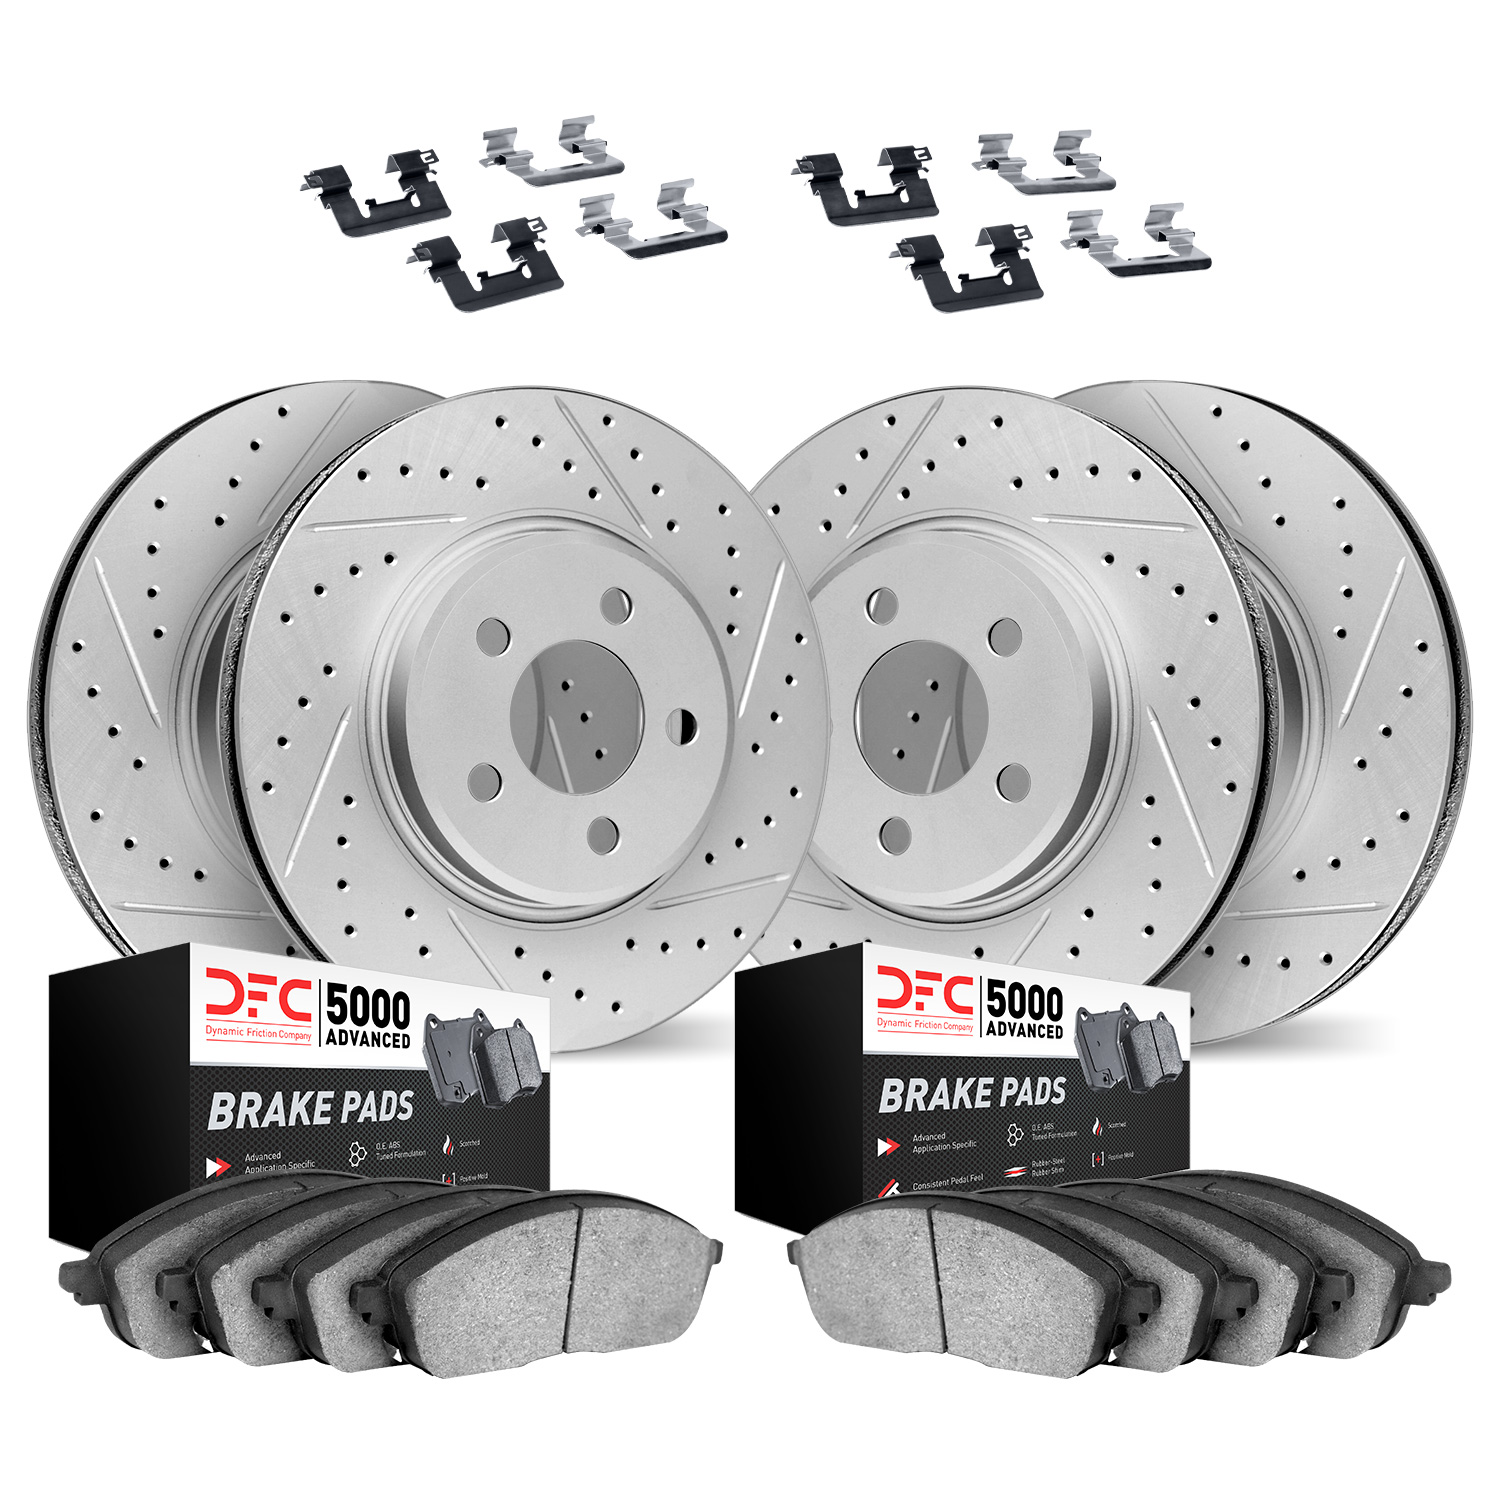 2514-45017 Geoperformance Drilled/Slotted Rotors w/5000 Advanced Brake Pads Kit & Hardware, 2010-2017 GM, Position: Front and Re